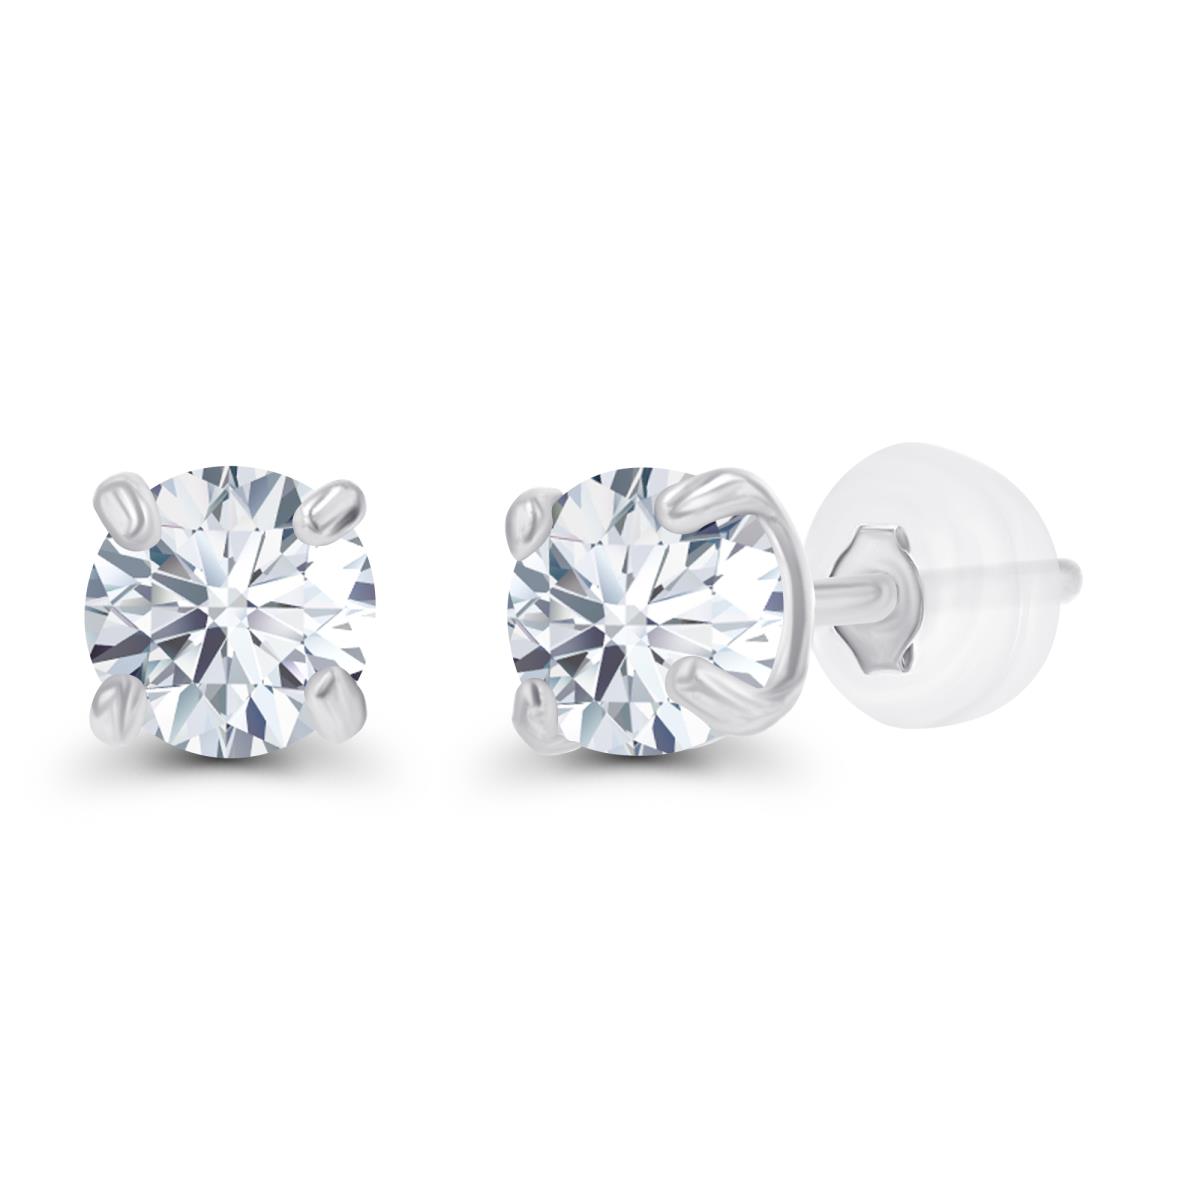 14K White Gold 3mm Round White Topaz Stud Earring with Silicone Back